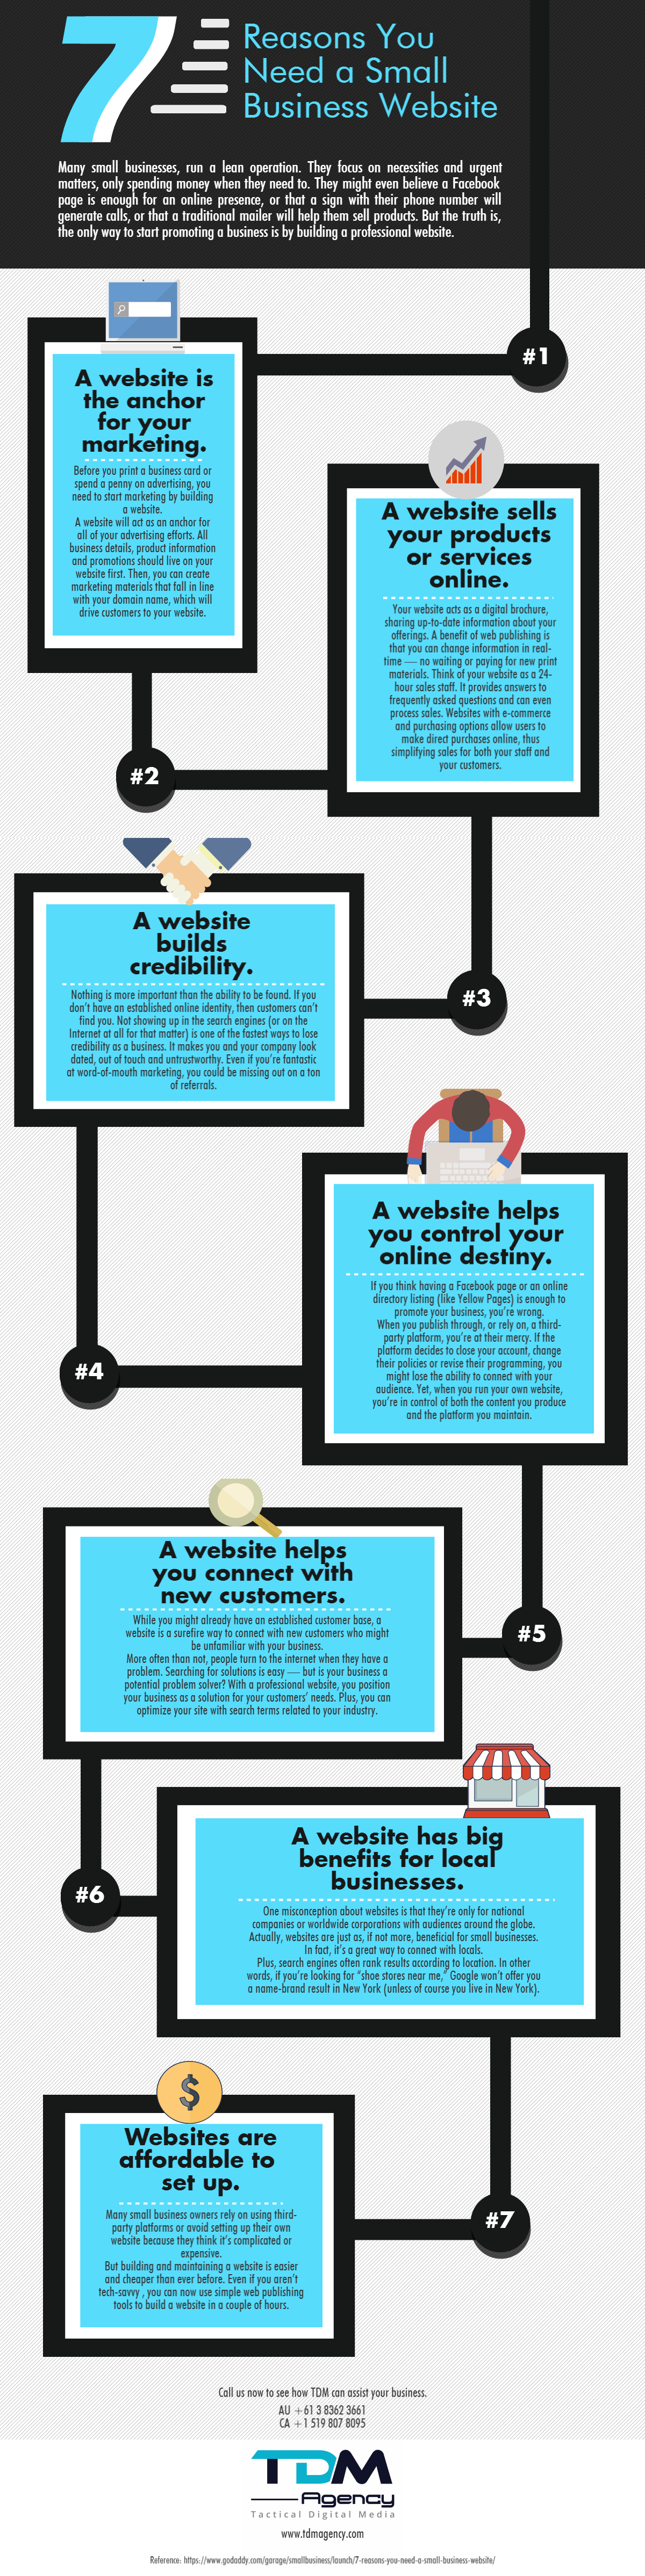 Reasons you need a website for small business